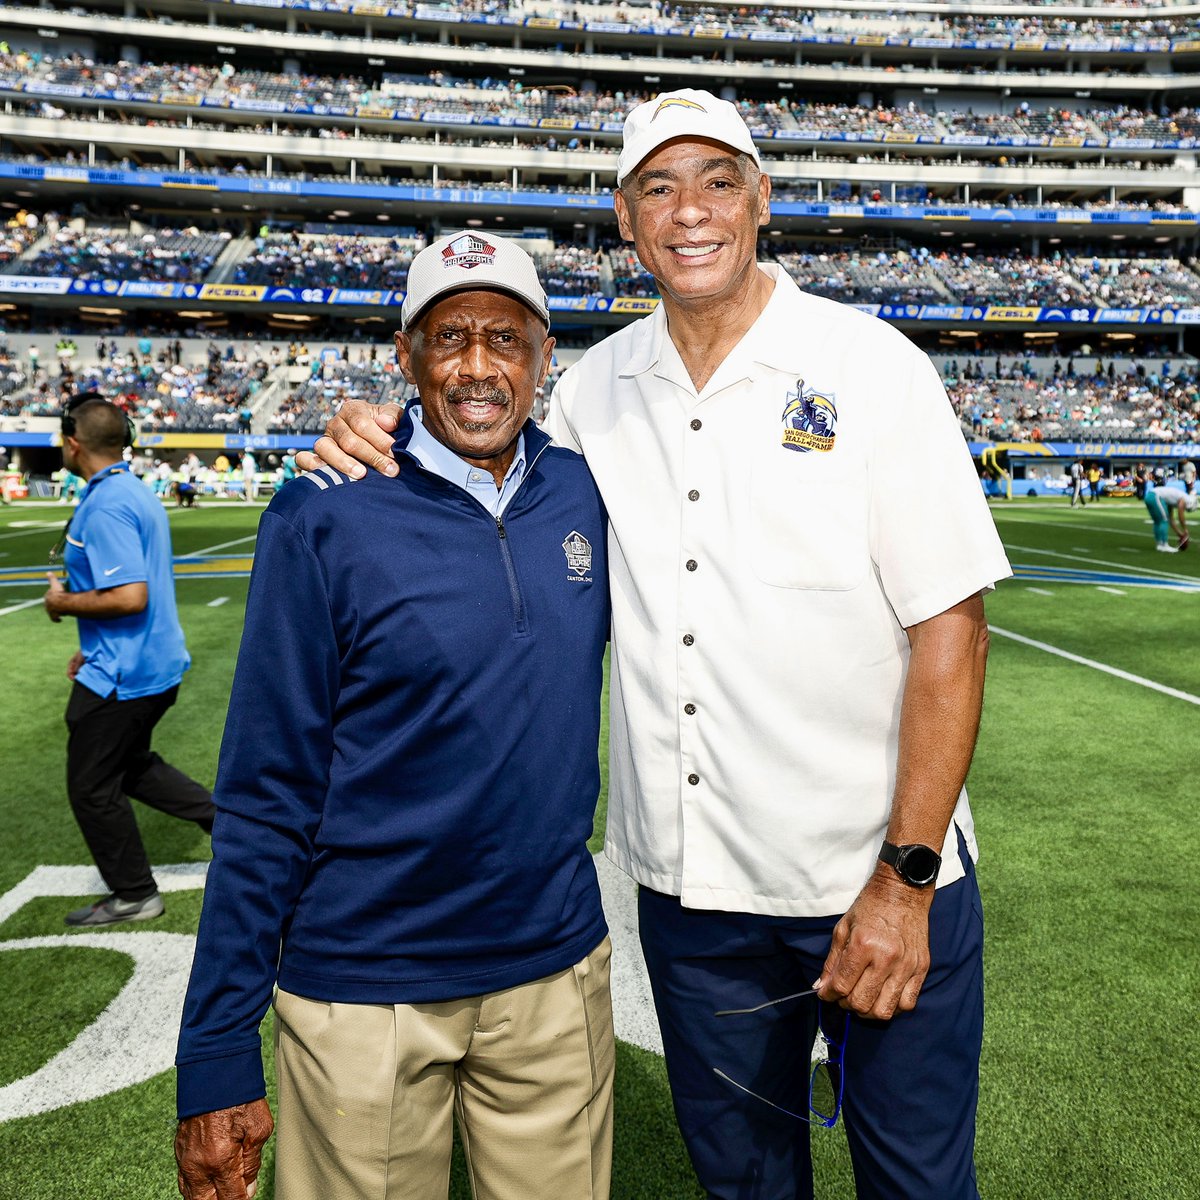 Today, two members of the Pro Football Hall of Fame received the ultimate team honor. During the @chargers' season opener on Sunday, Kellen Winslow and Charlie Joiner had their numbers retired.